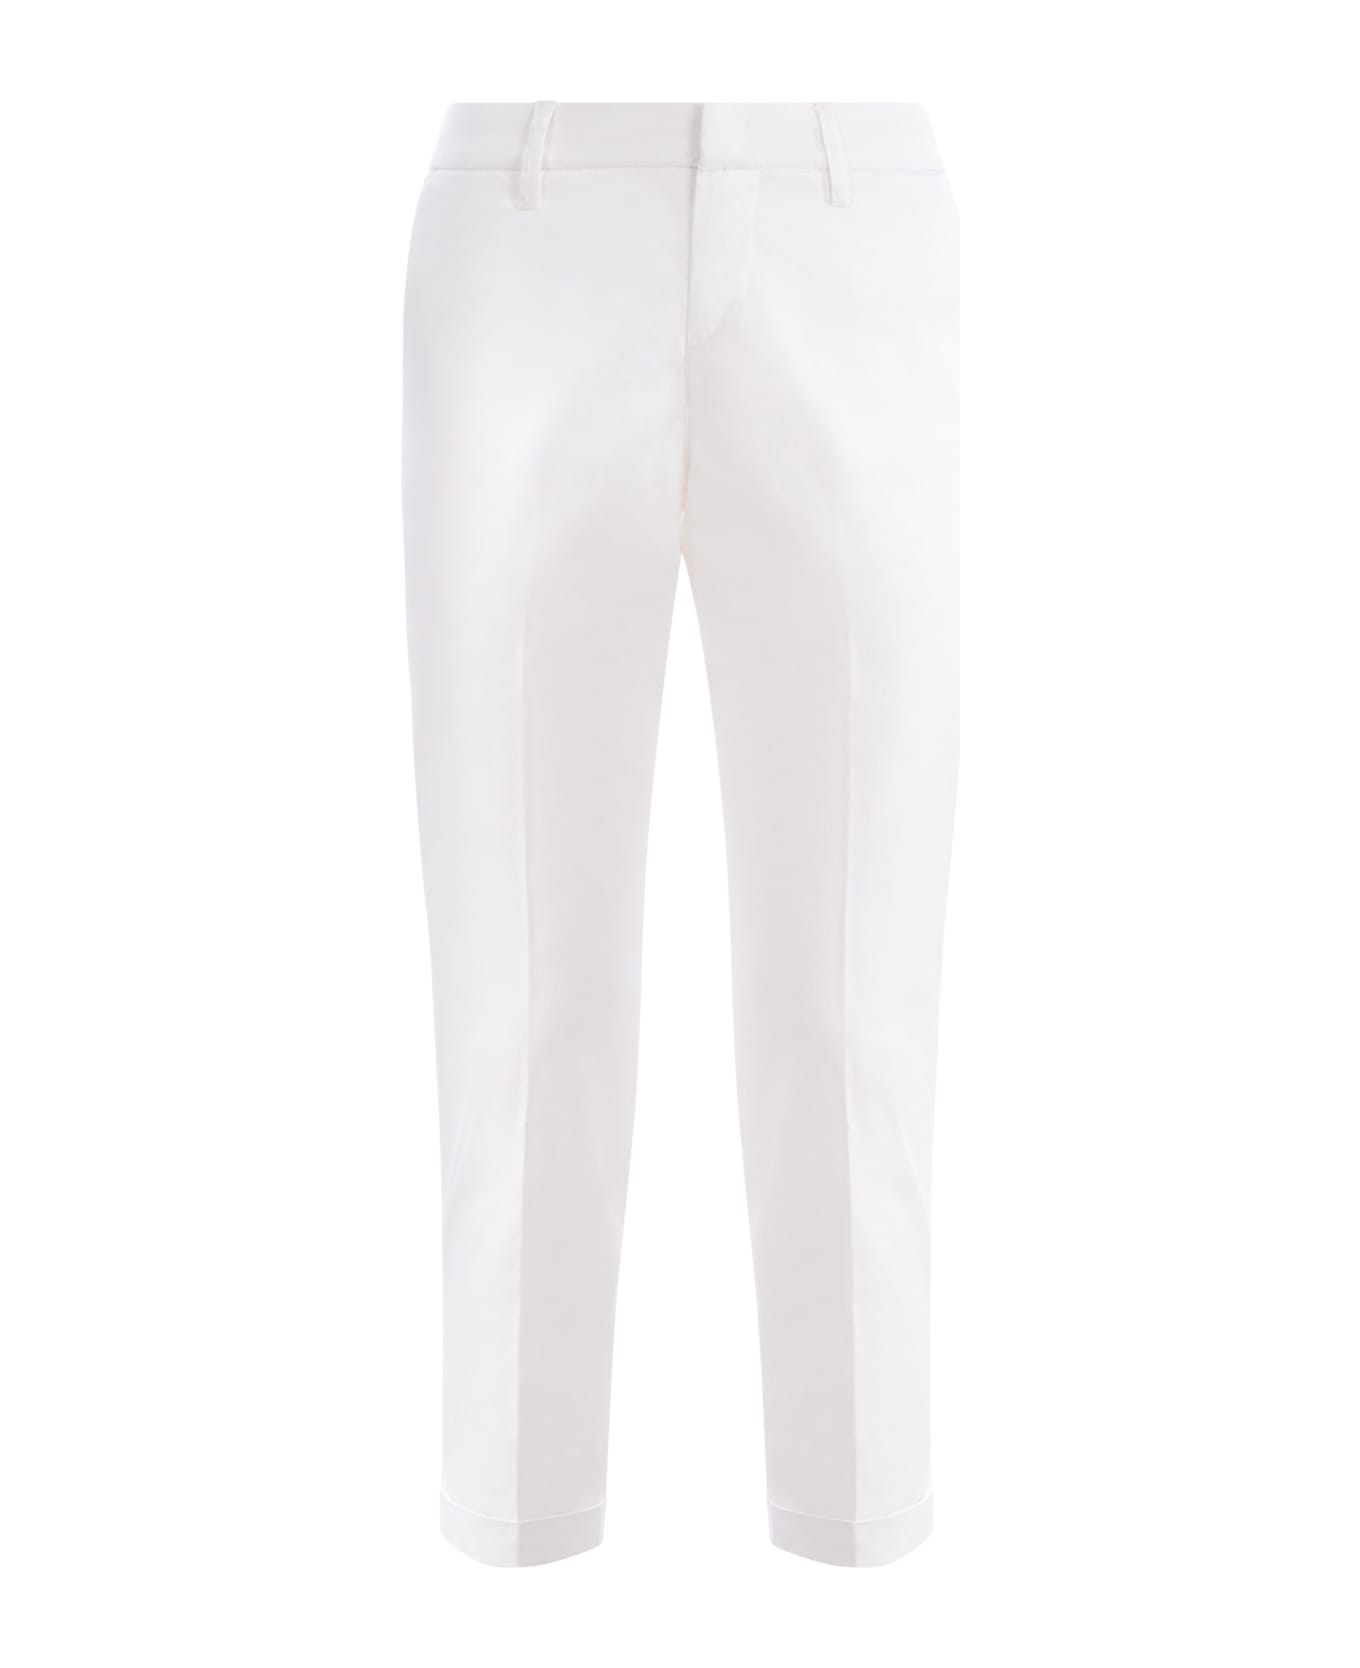 Fay Trousers Fay "chino" In Stretch Cotton - Bianco ボトムス